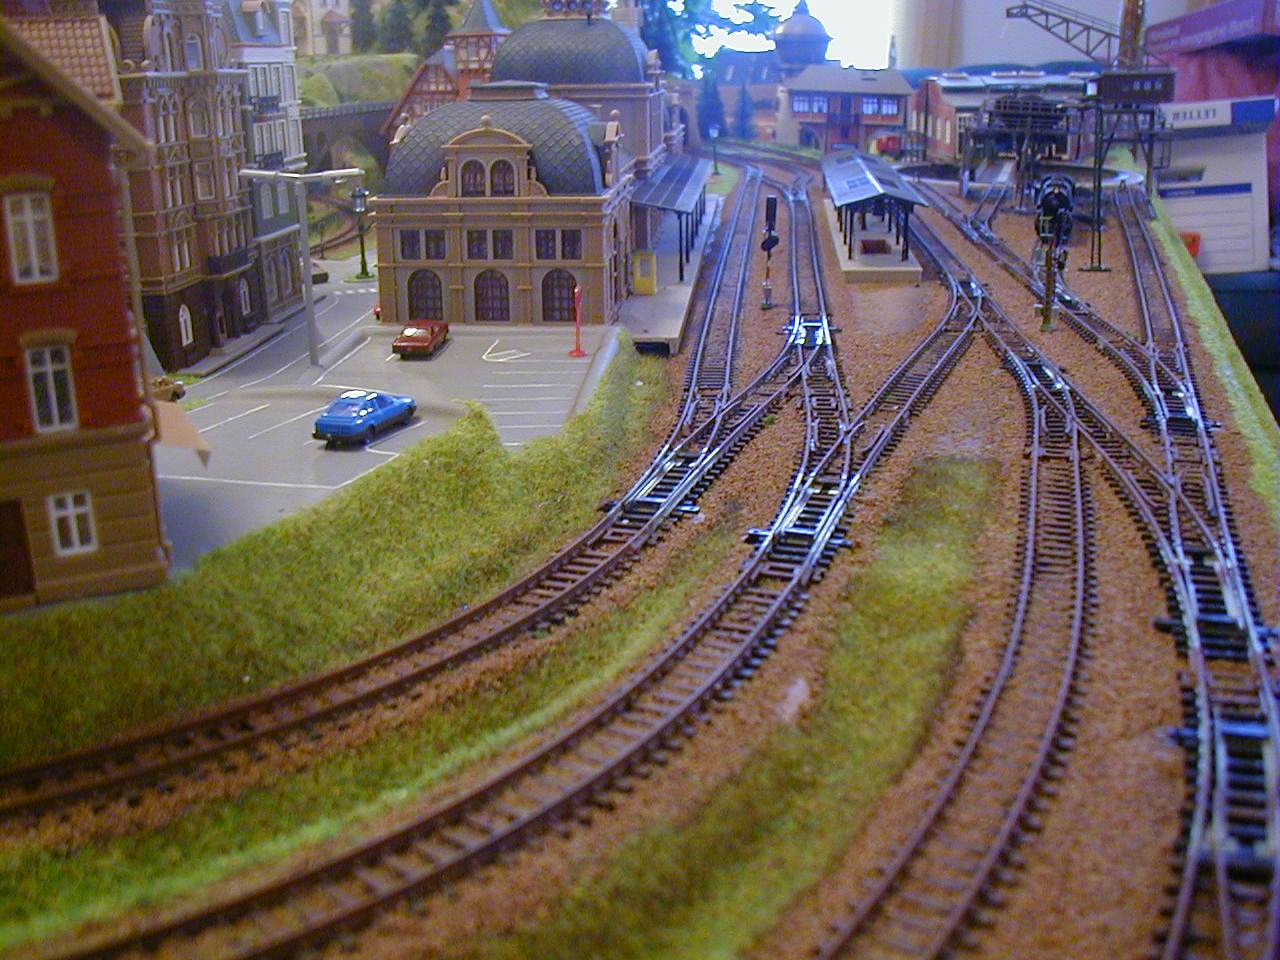  roads in the model. Railroads are beautifully placed in this layout